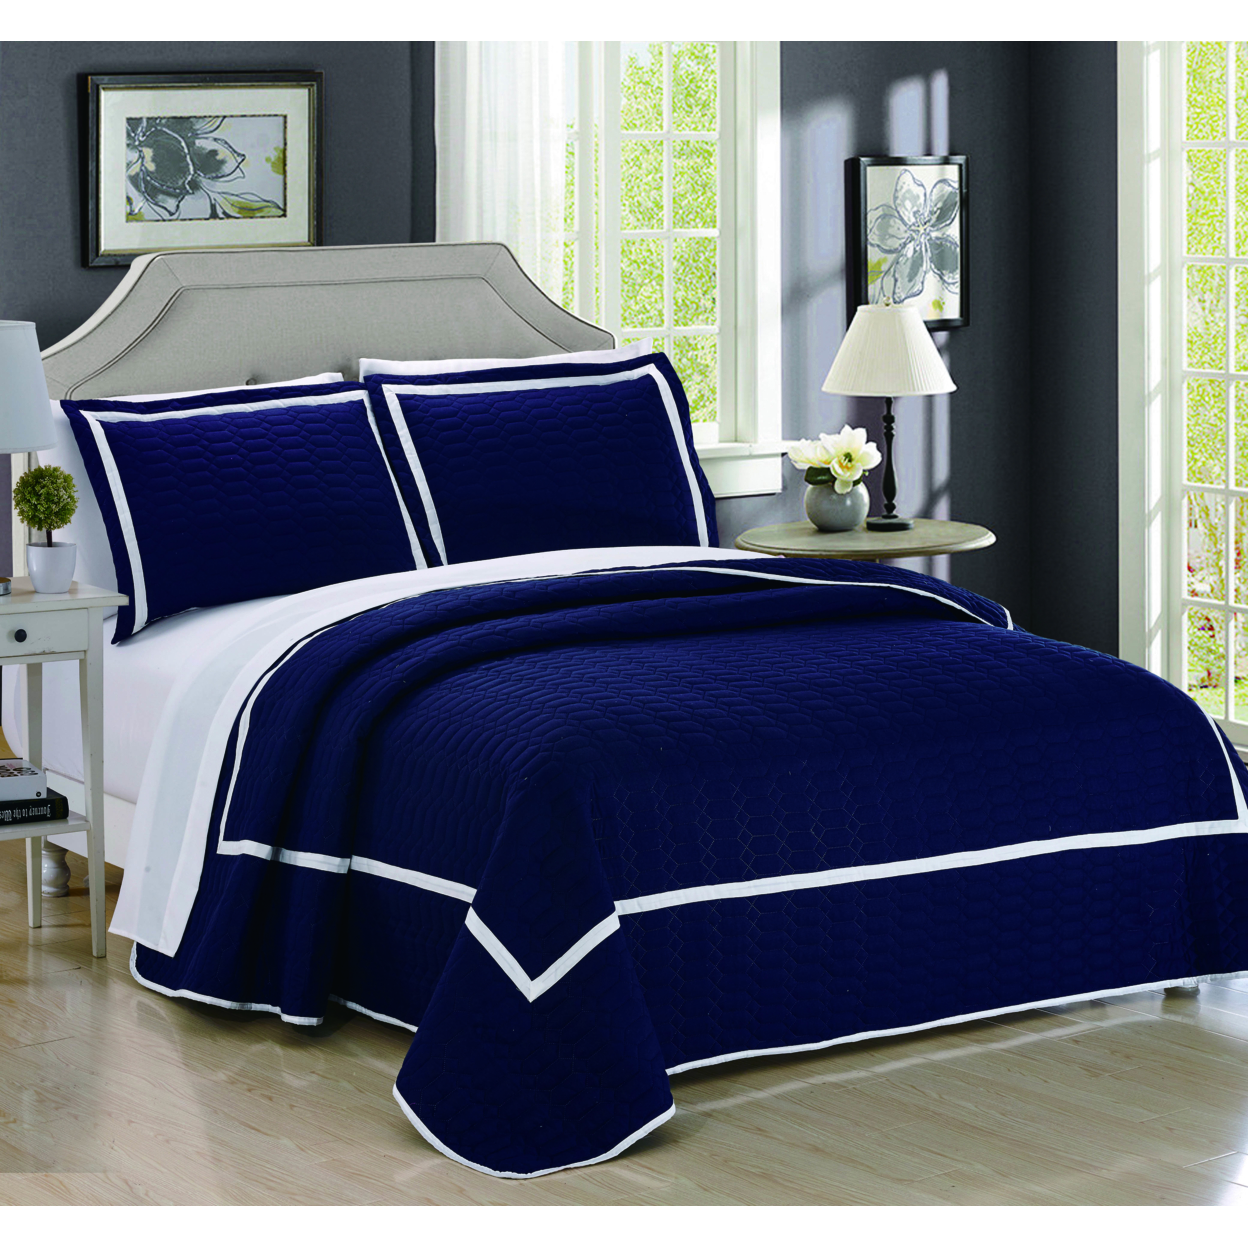 3 Or 2 Piece Halrowe Hotel Collection 2 Tone Banded Quilted Geometrical Embroidered Quilt Set - Navy, Queen